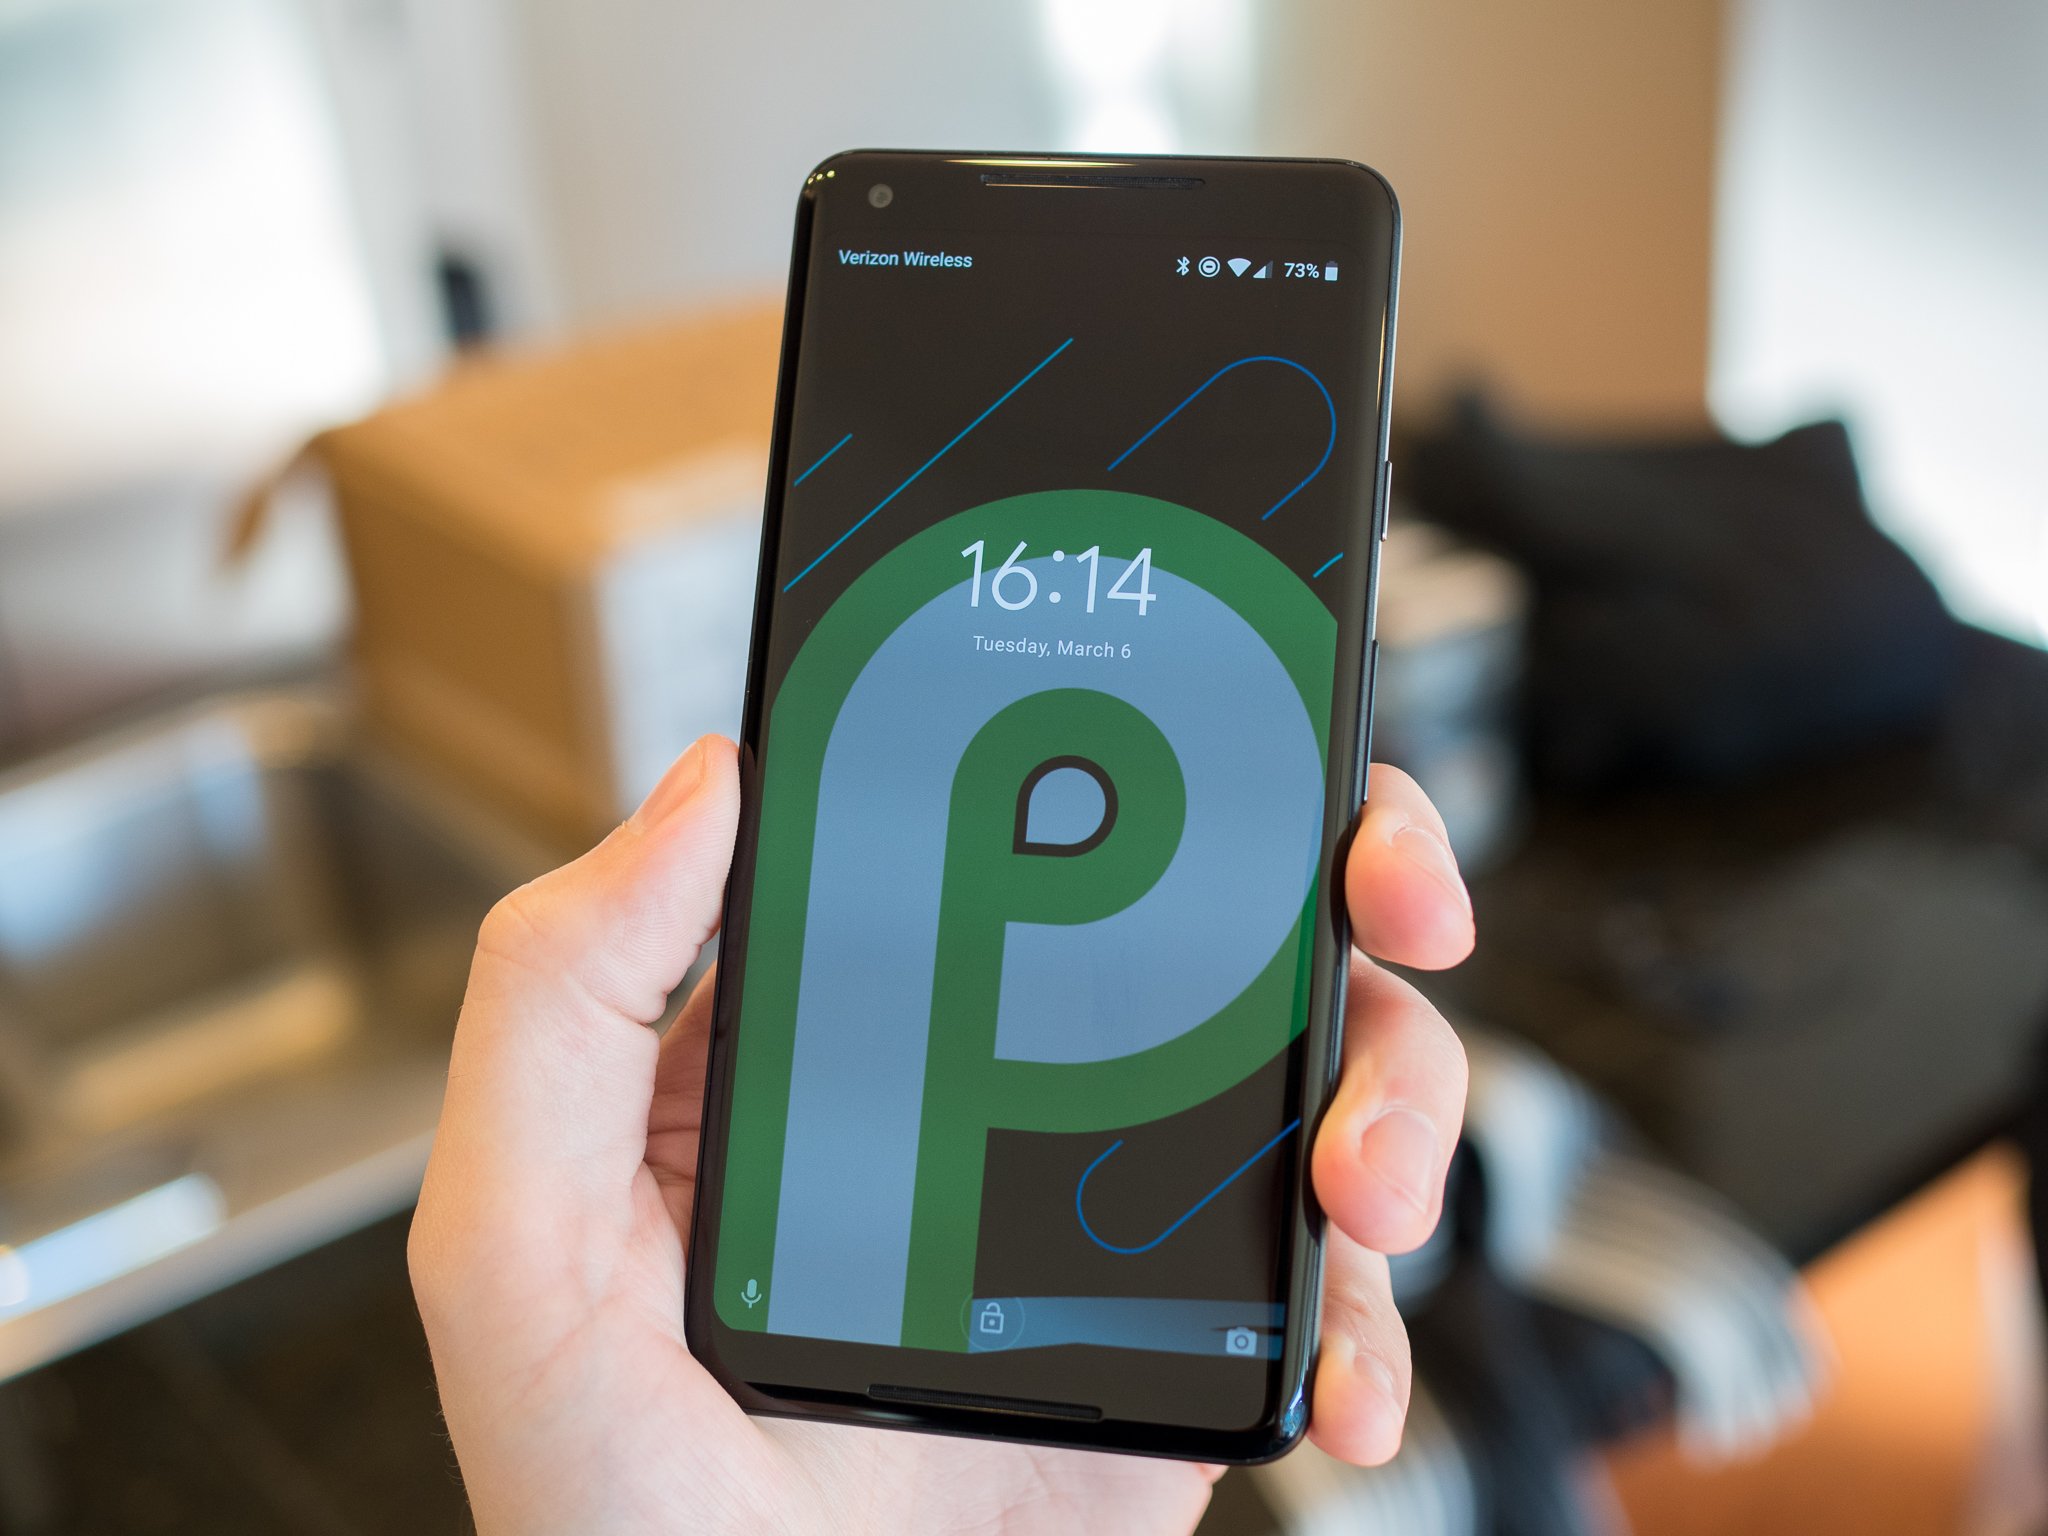 Android Pie logo on a Pixel 2 XL